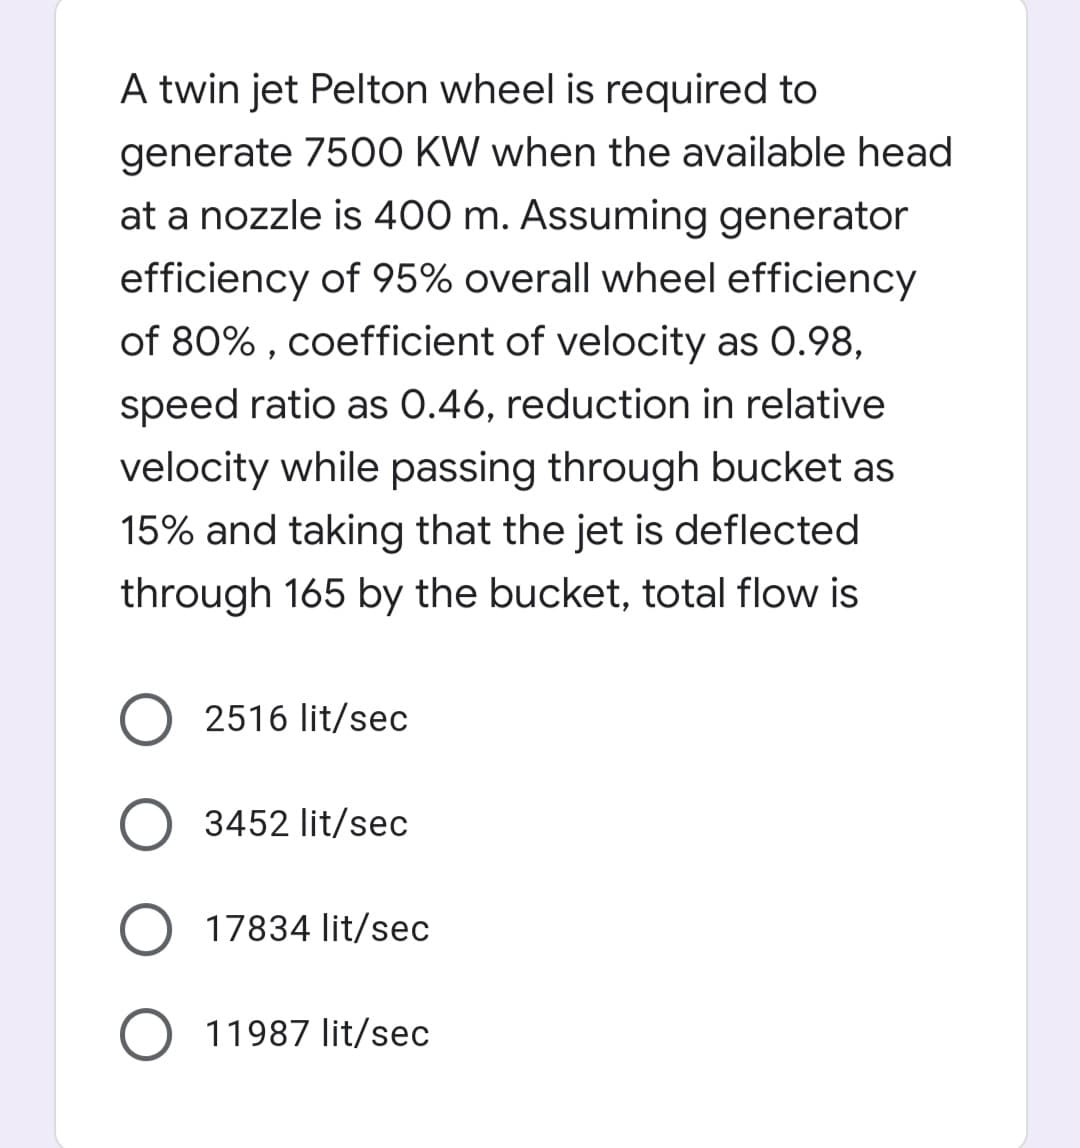 A twin jet Pelton wheel is required to
generate 7500 KW when the available head
at a nozzle is 400 m. Assuming generator
efficiency of 95% overall wheel efficiency
of 80% , coefficient of velocity as 0.98,
speed ratio as 0.46, reduction in relative
velocity while passing through bucket as
15% and taking that the jet is deflected
through 165 by the bucket, total flow is
2516 lit/sec
O 3452 lit/sec
17834 lit/sec
11987 lit/sec
